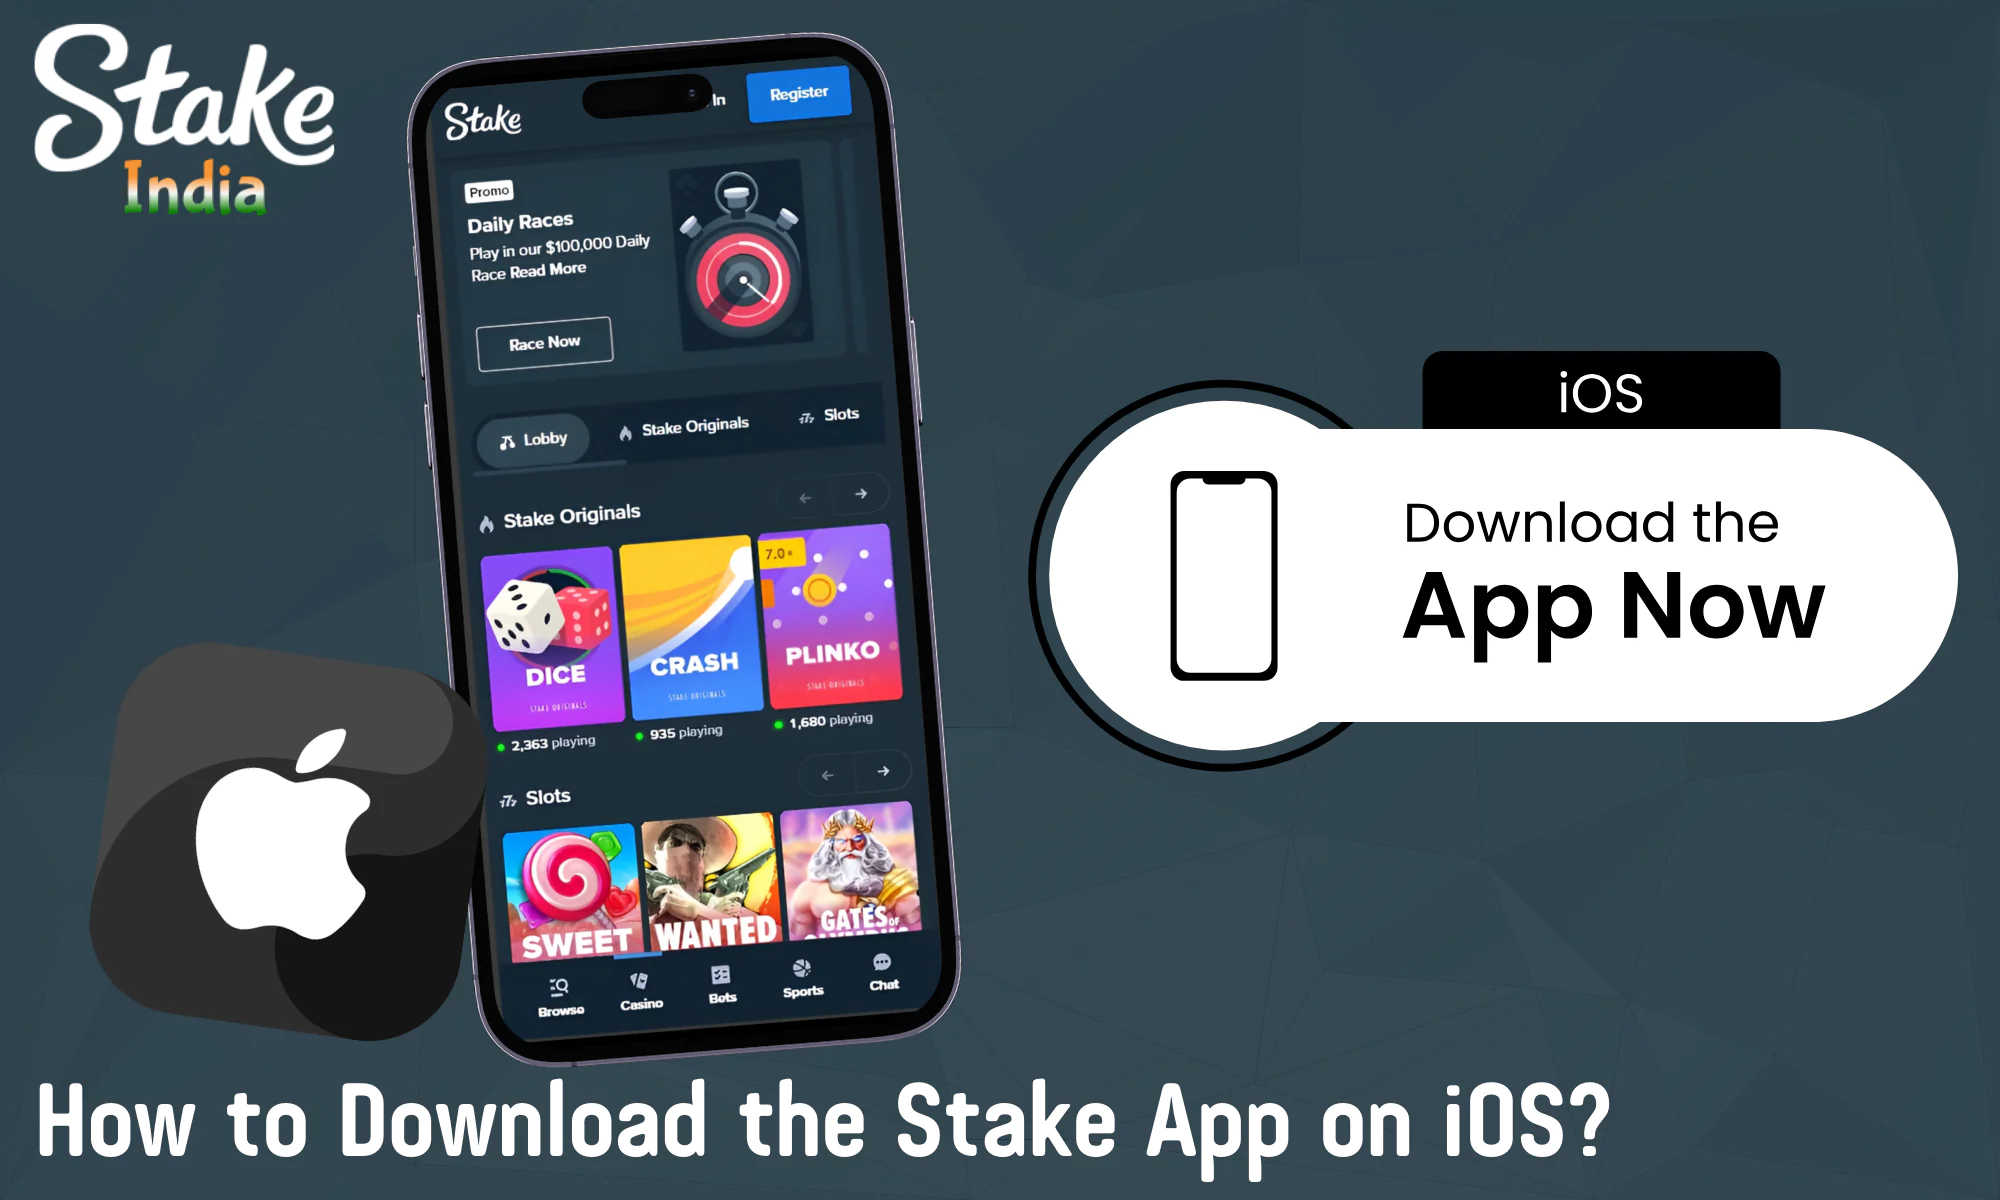 How to get the Stake app on iPhone and iPad, step-by-step instructions